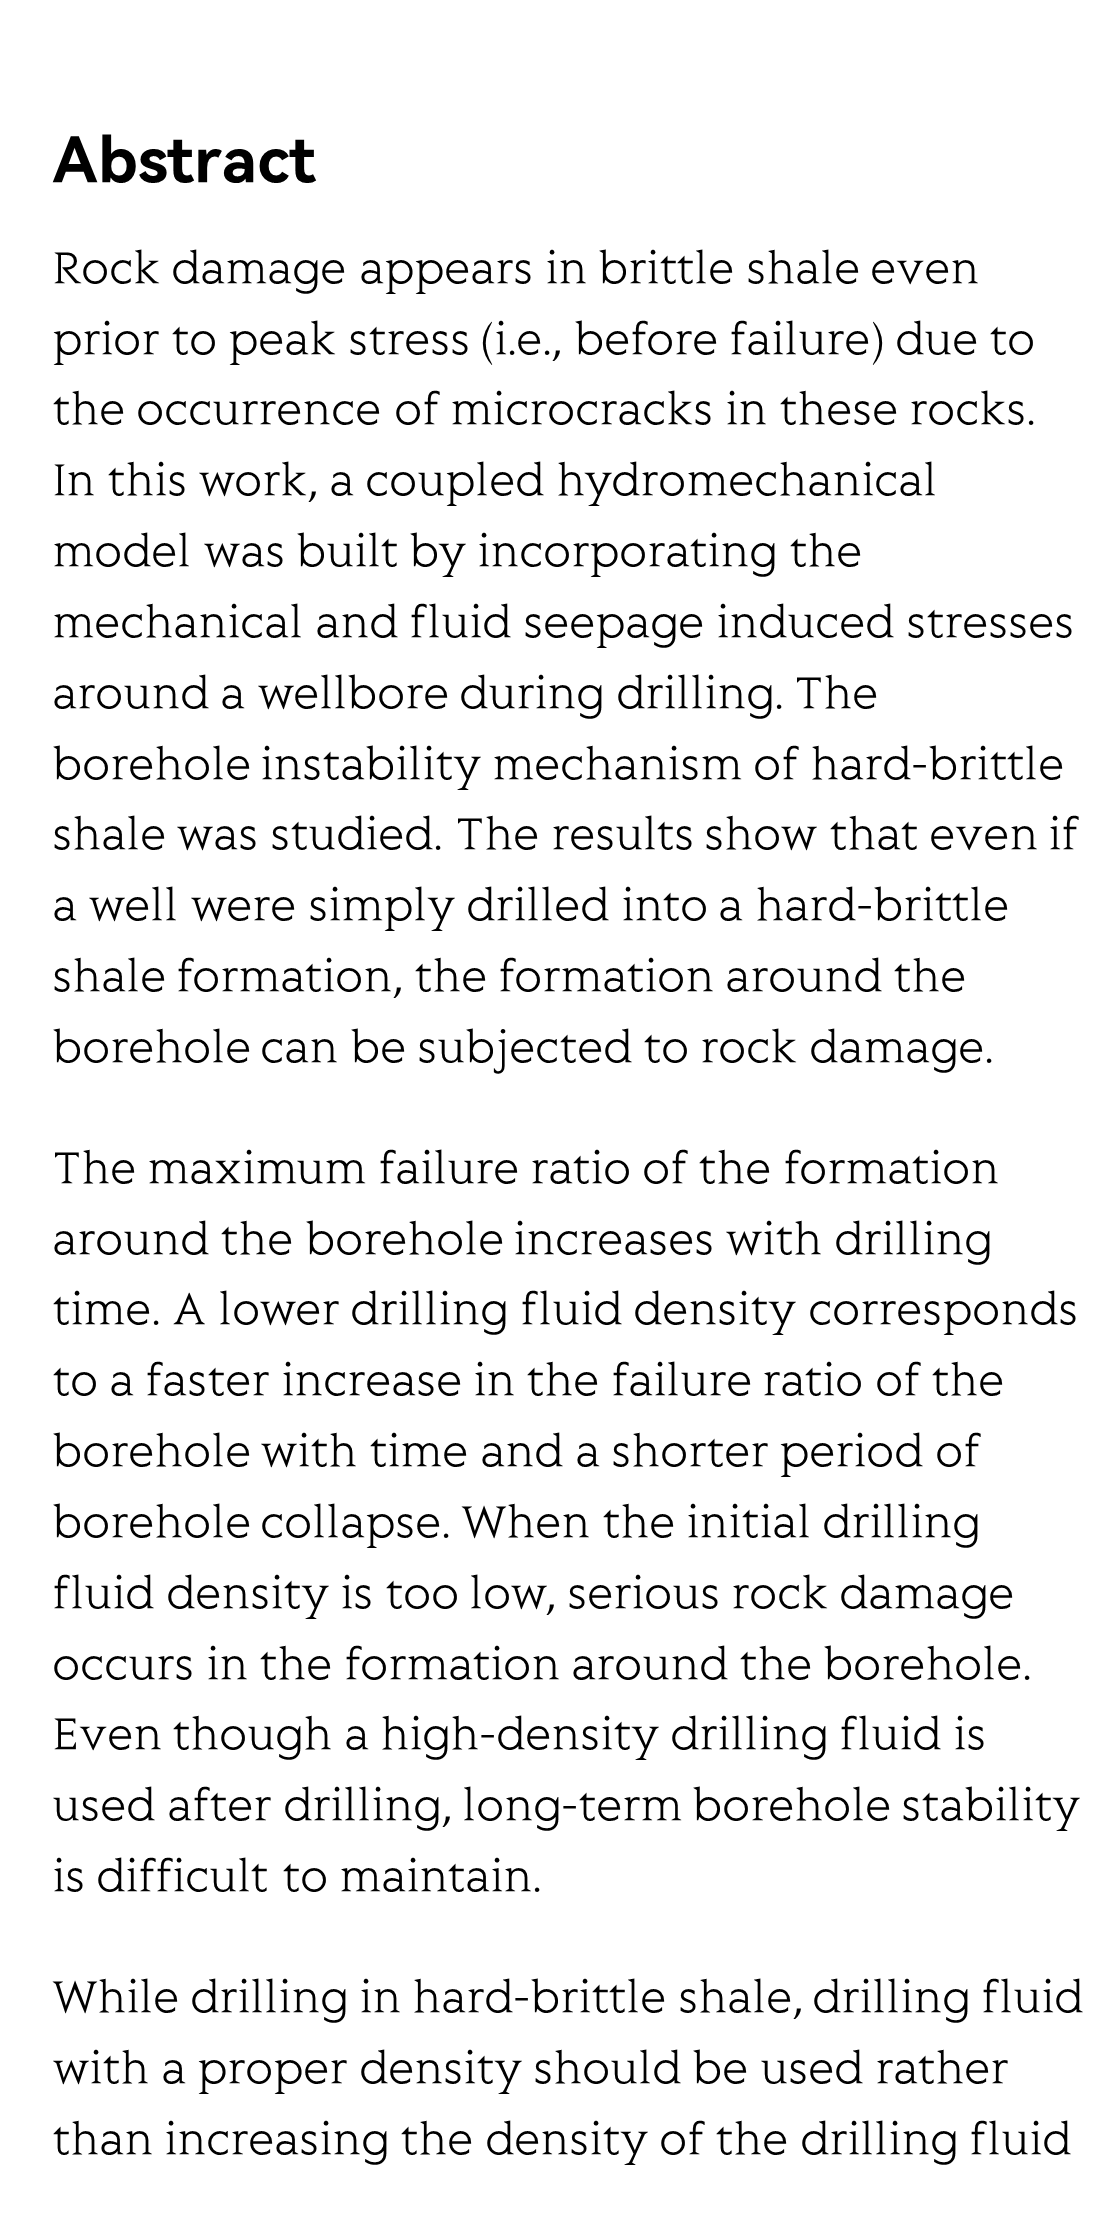 Time-dependent borehole stability in hard-brittle shale_2